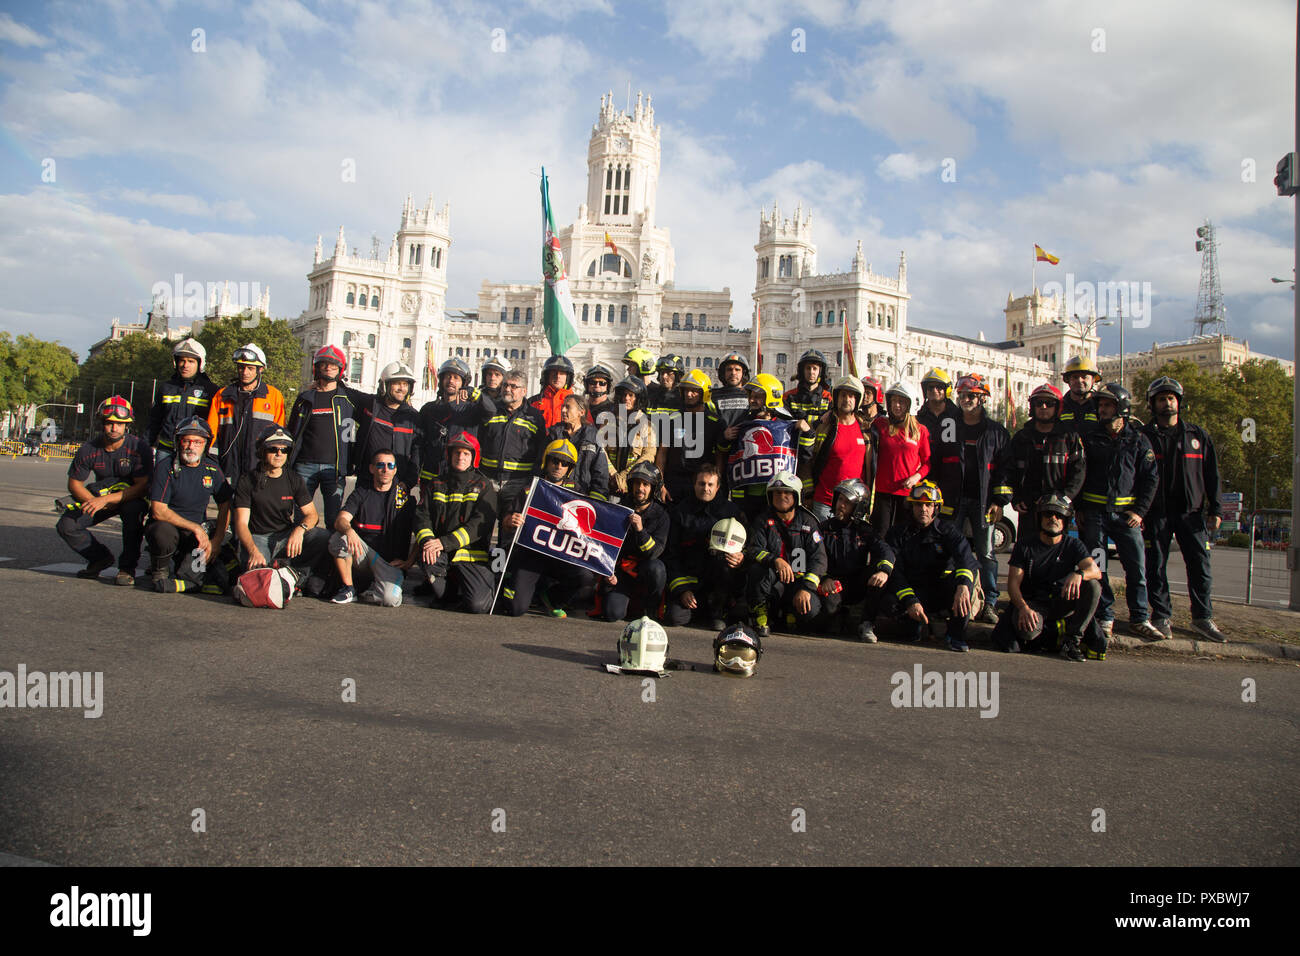 Madrid, Spain. 20th Oct, 2018. The territorial representatives of the fire brigades are seen posing for the camera during a demonstration in Madrid for a law that guarantees decent working conditions and ends precariousness and insecurity in their work. They also commemorated their colleague Eloy Palacio, the Asturian fireman who was killed in service because he did not have the necessary resources for his work. Credit: SOPA Images Limited/Alamy Live News Stock Photo